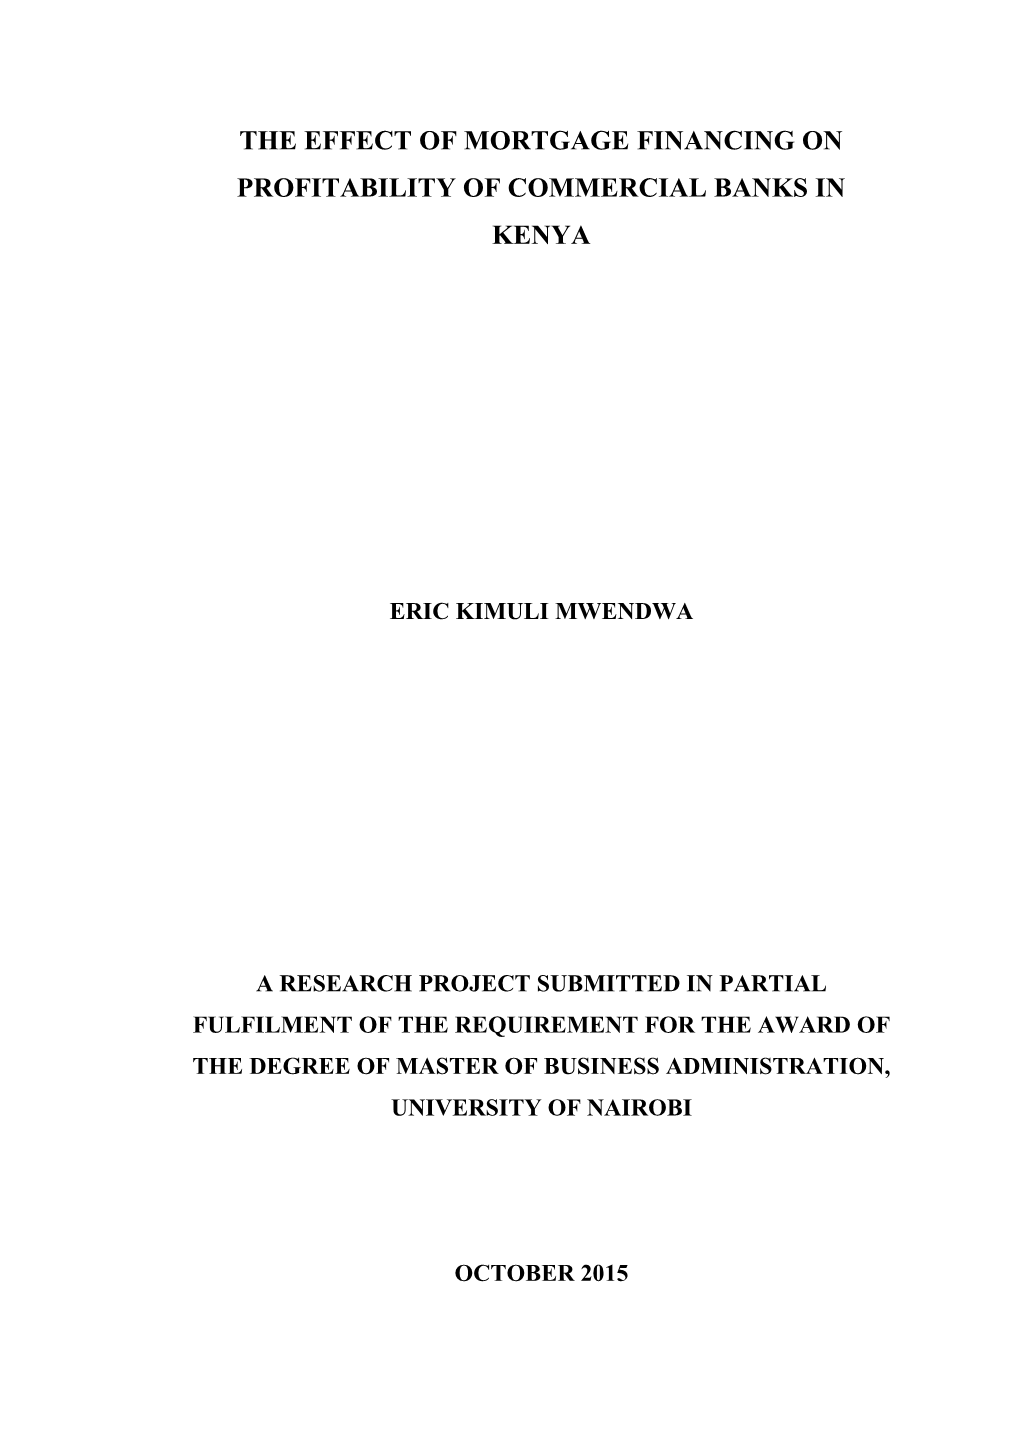 The Effect of Mortgage Financing on Profitability of Commercial Banks in Kenya